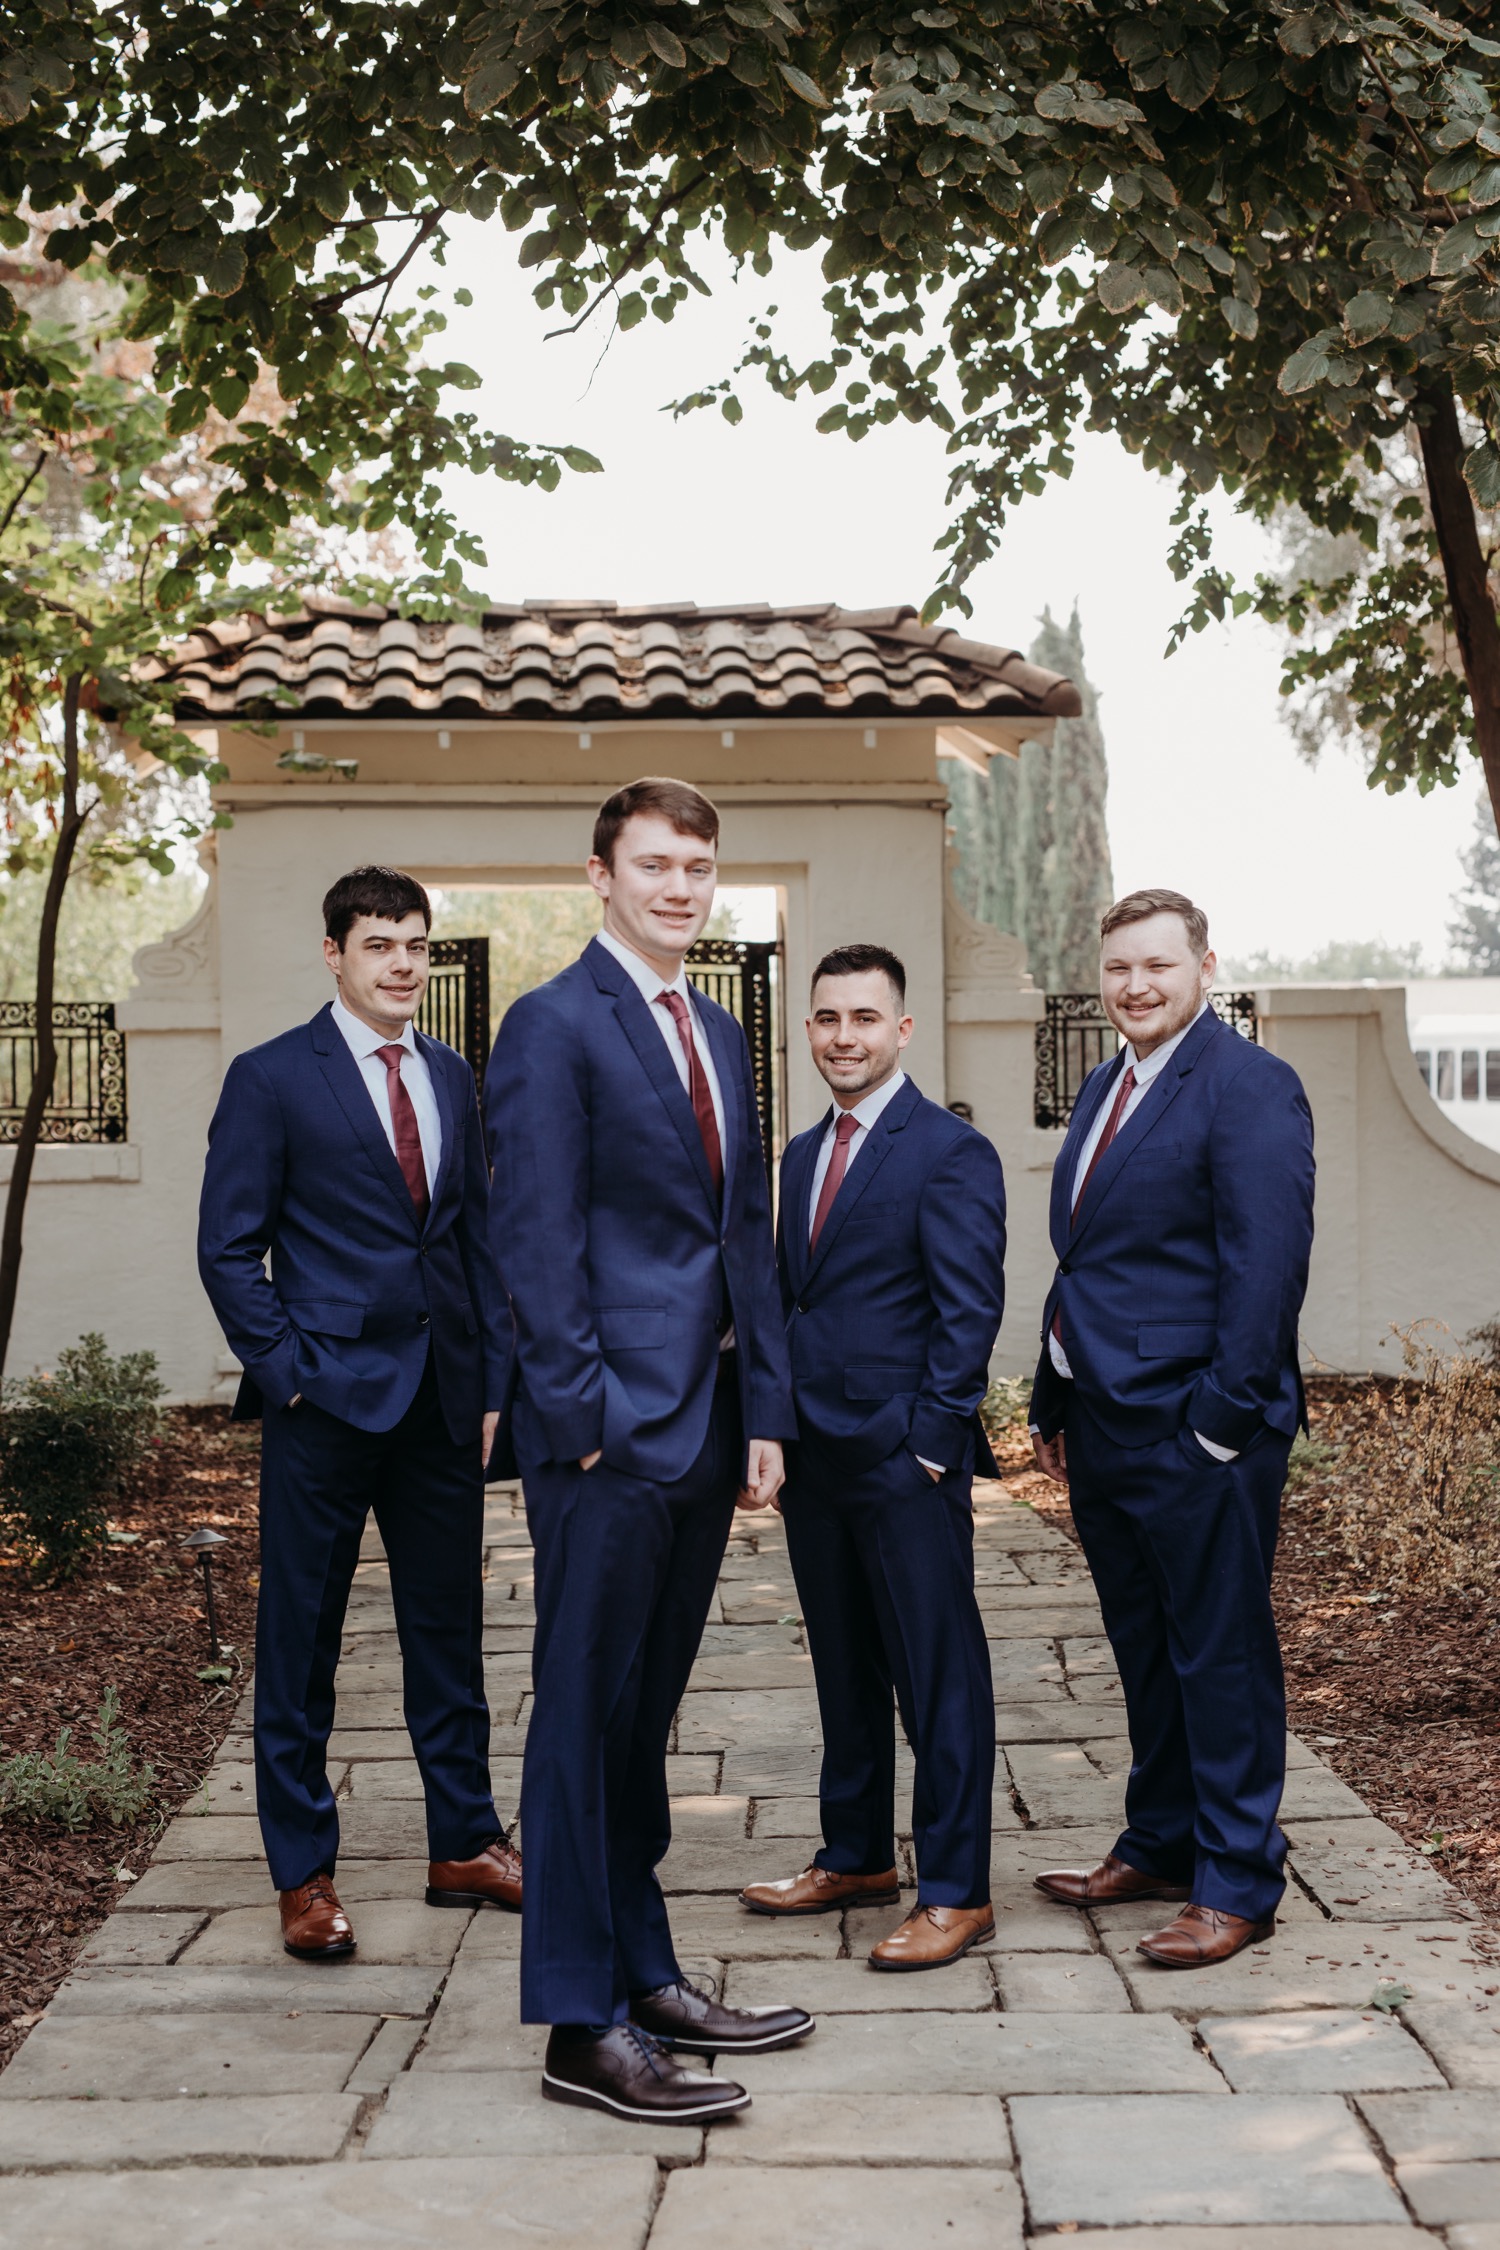 Groom and his groomsmen in their suits pre-wedding at The Maples in Woodland, CA